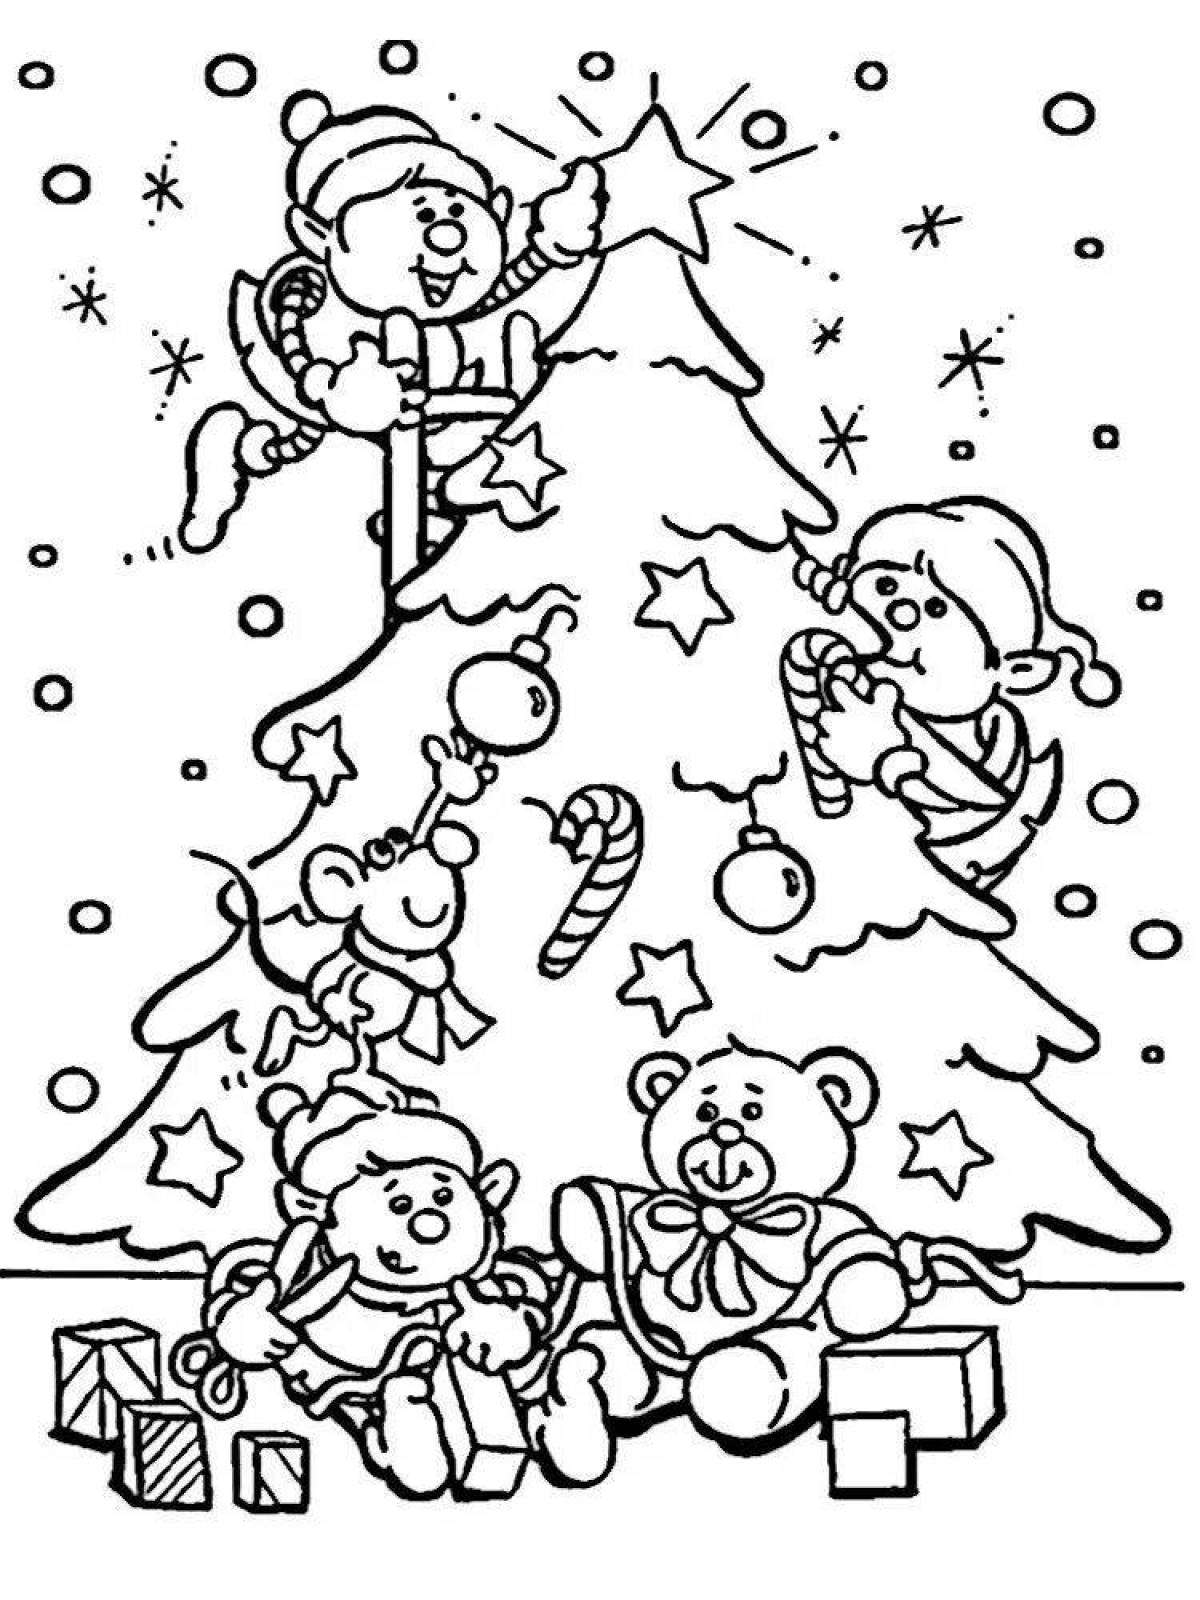 Merry Christmas coloring book for children 6-7 years old